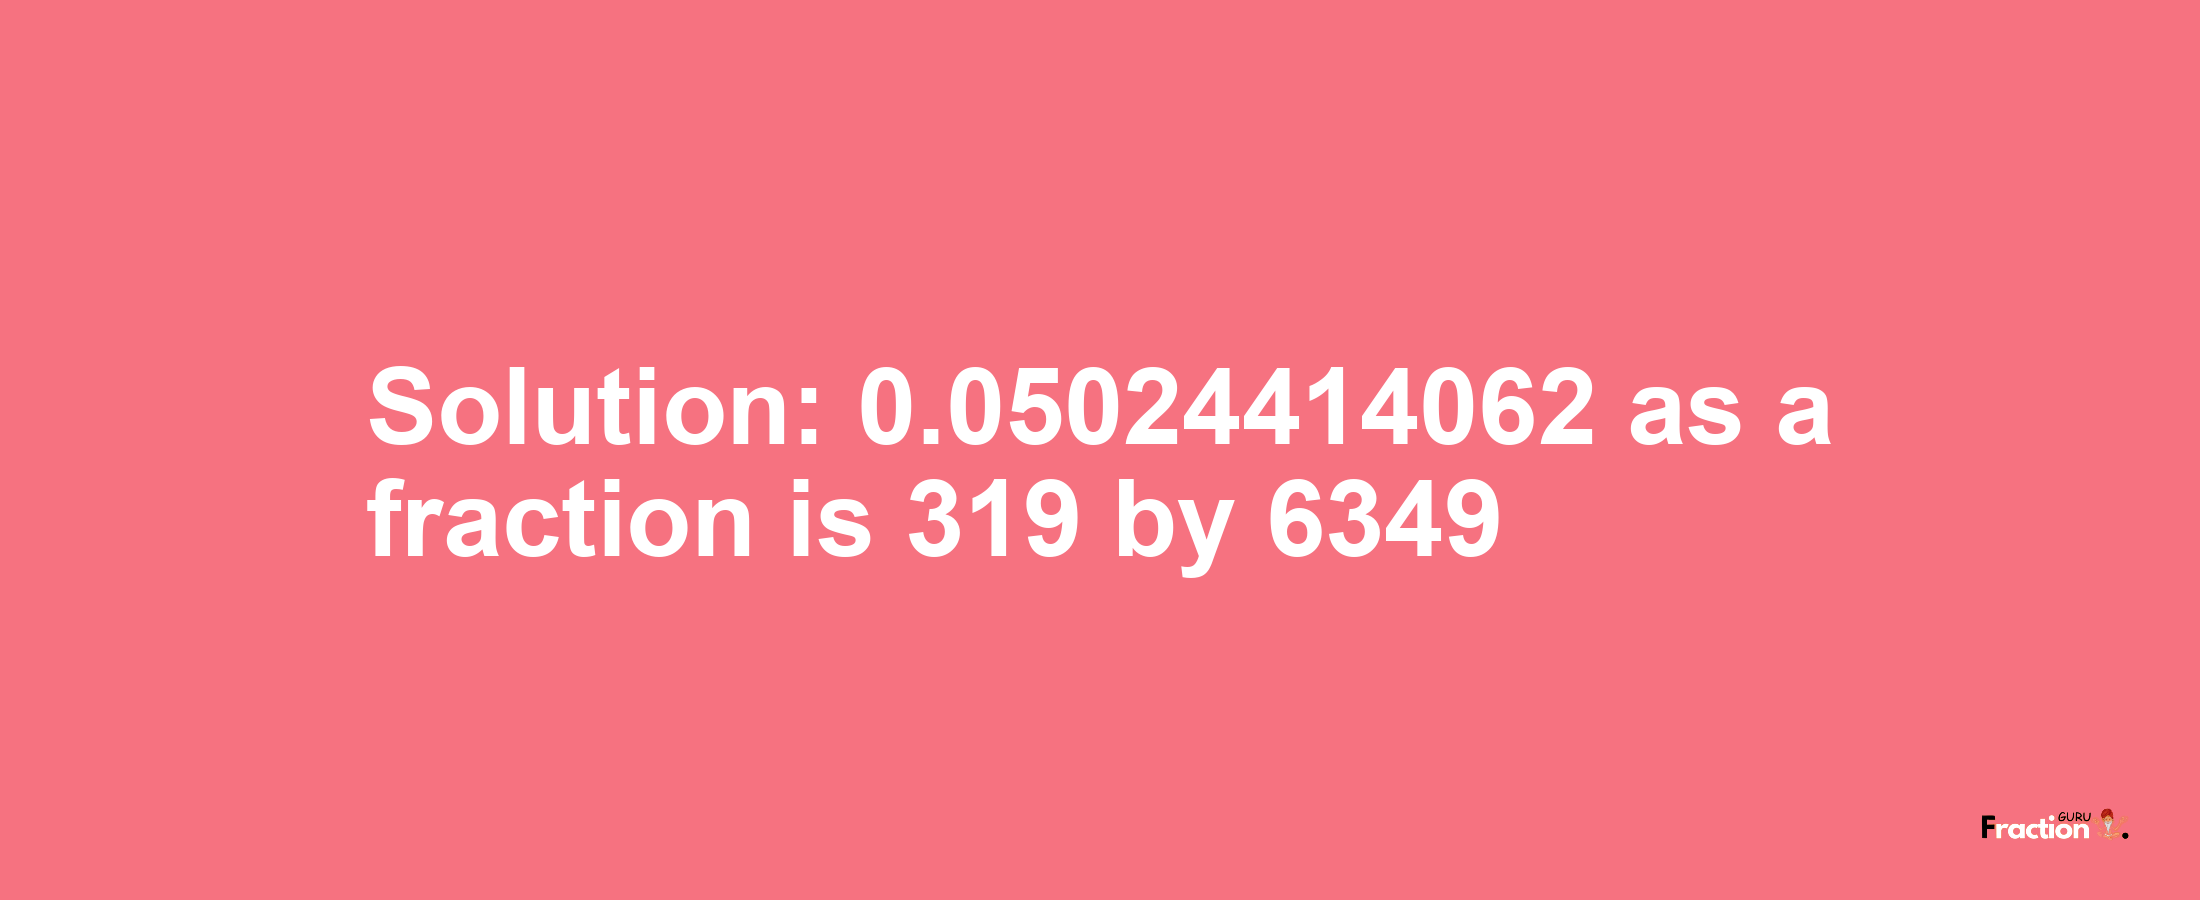 Solution:0.05024414062 as a fraction is 319/6349